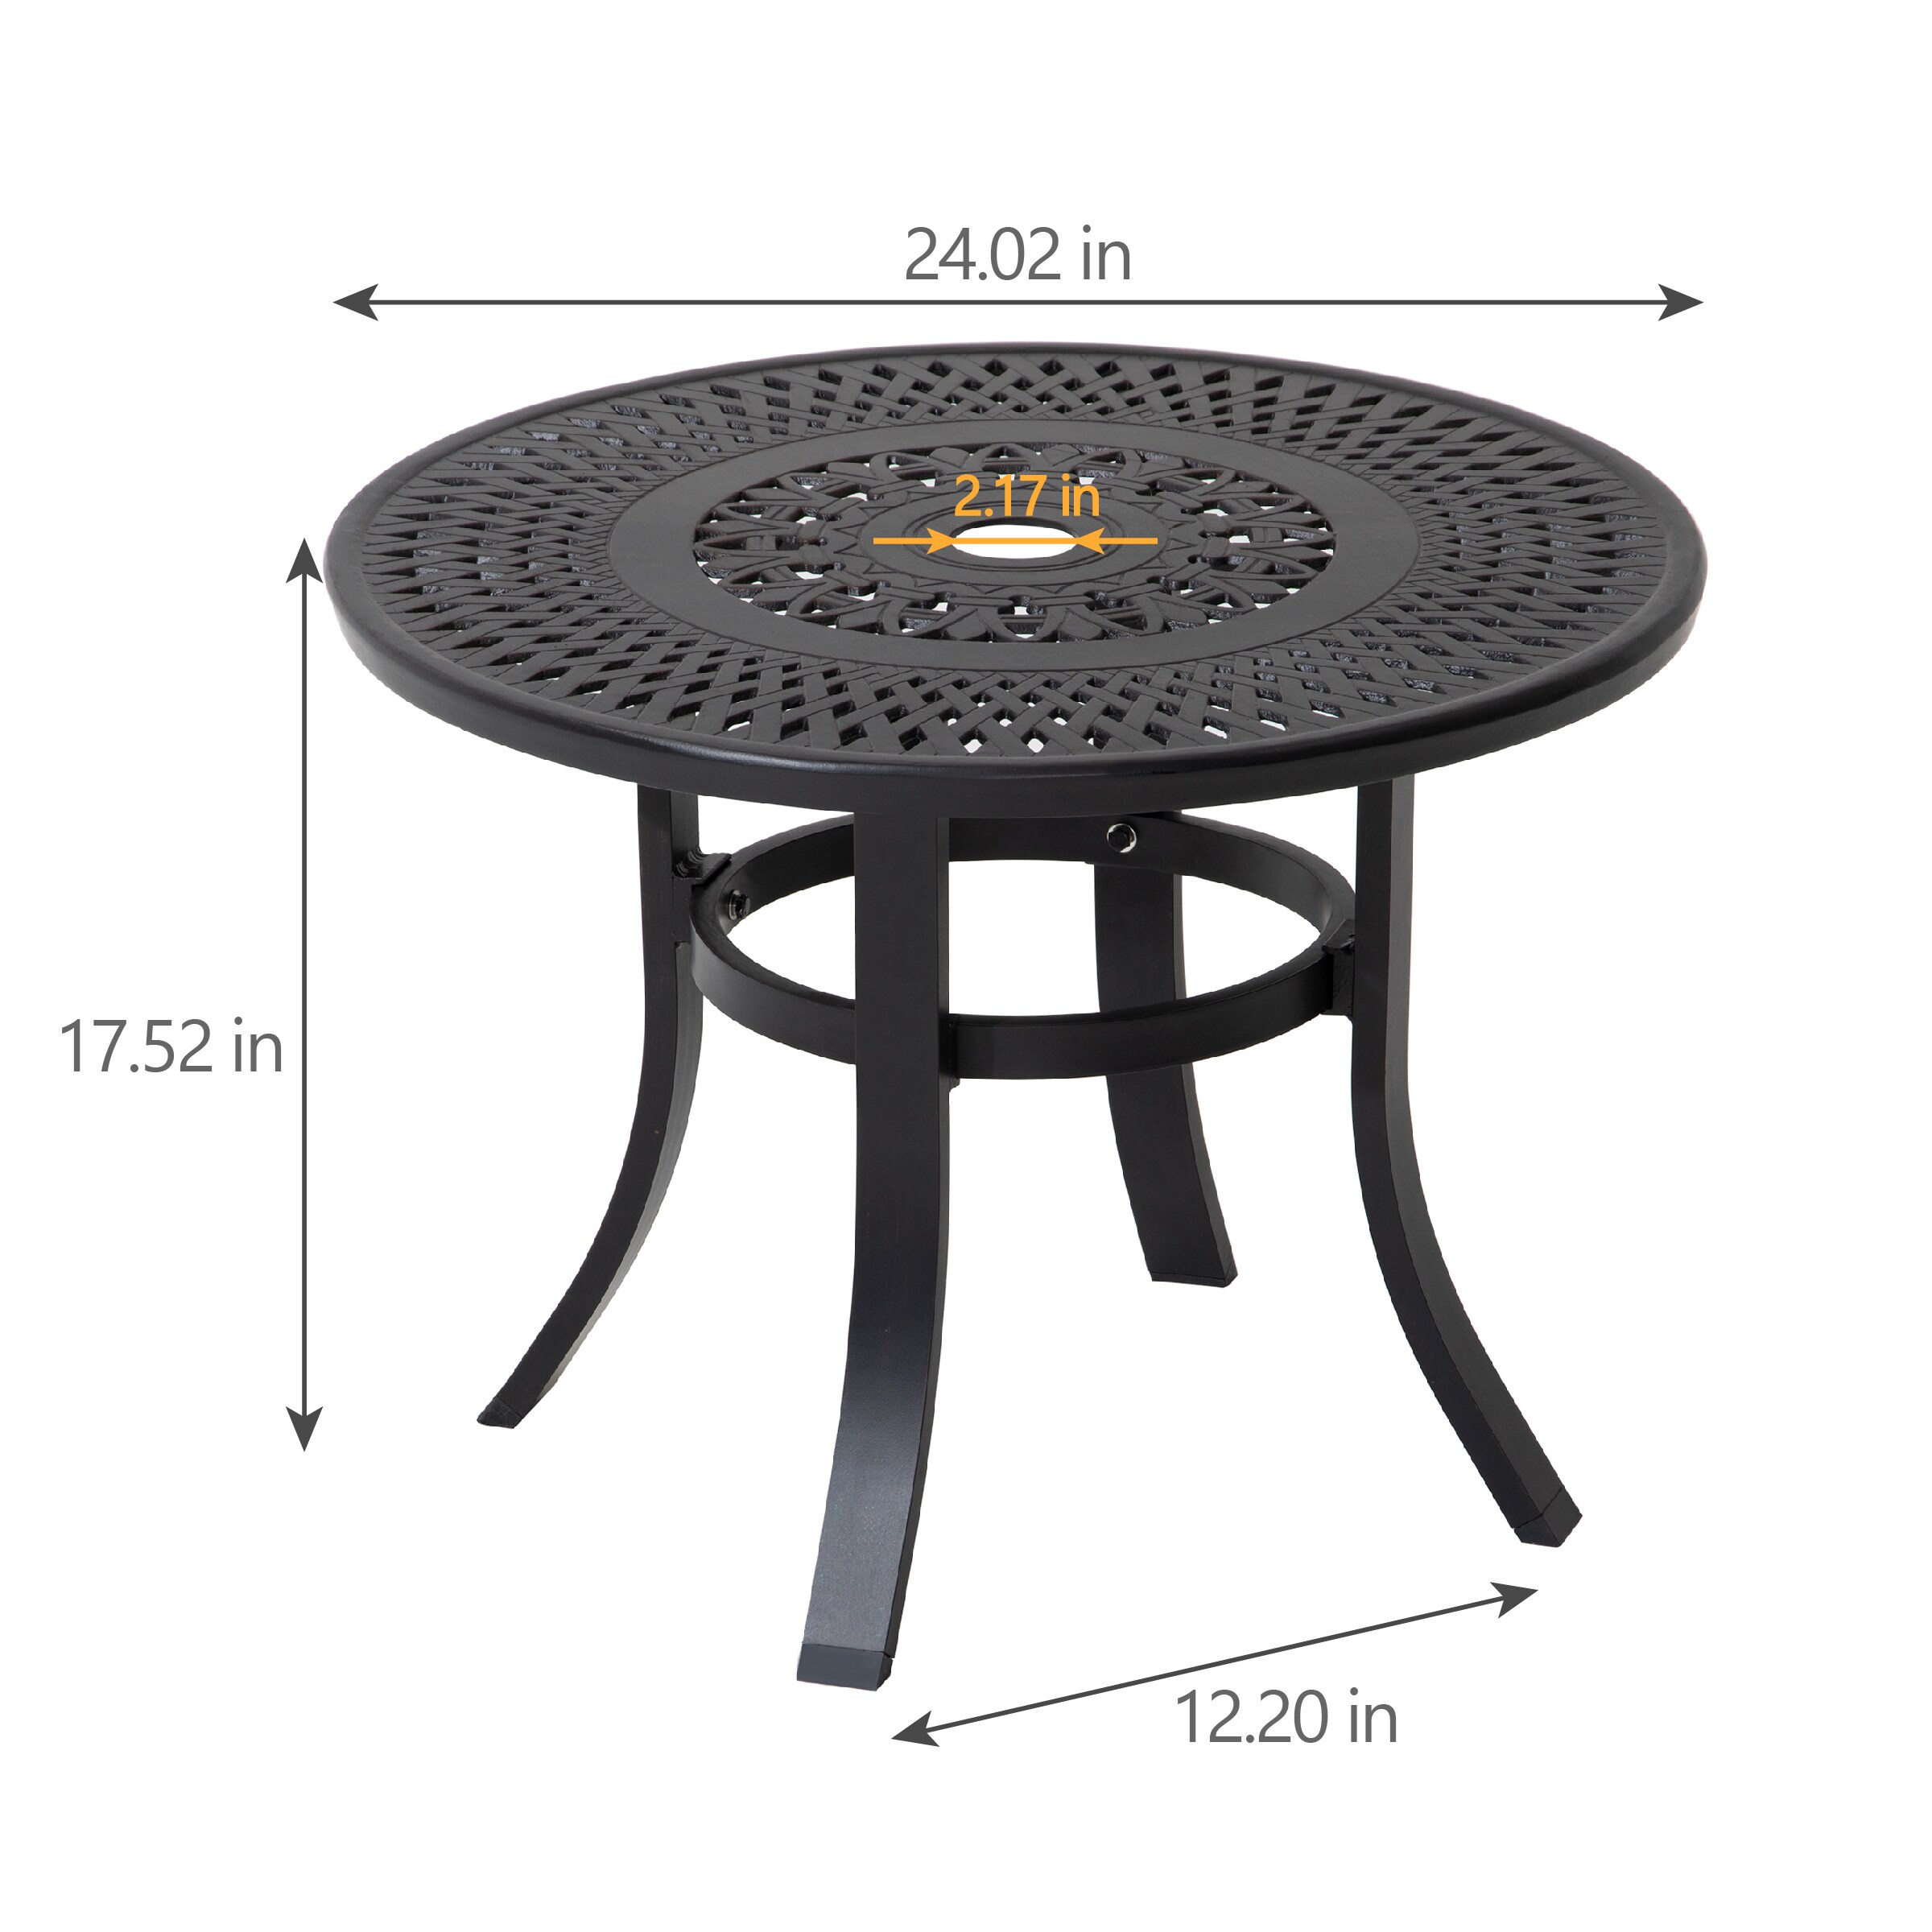 Details about   Dining Table Bar Height Pub Round Tall Folding Indoor Outdoor Patio Metal Party 